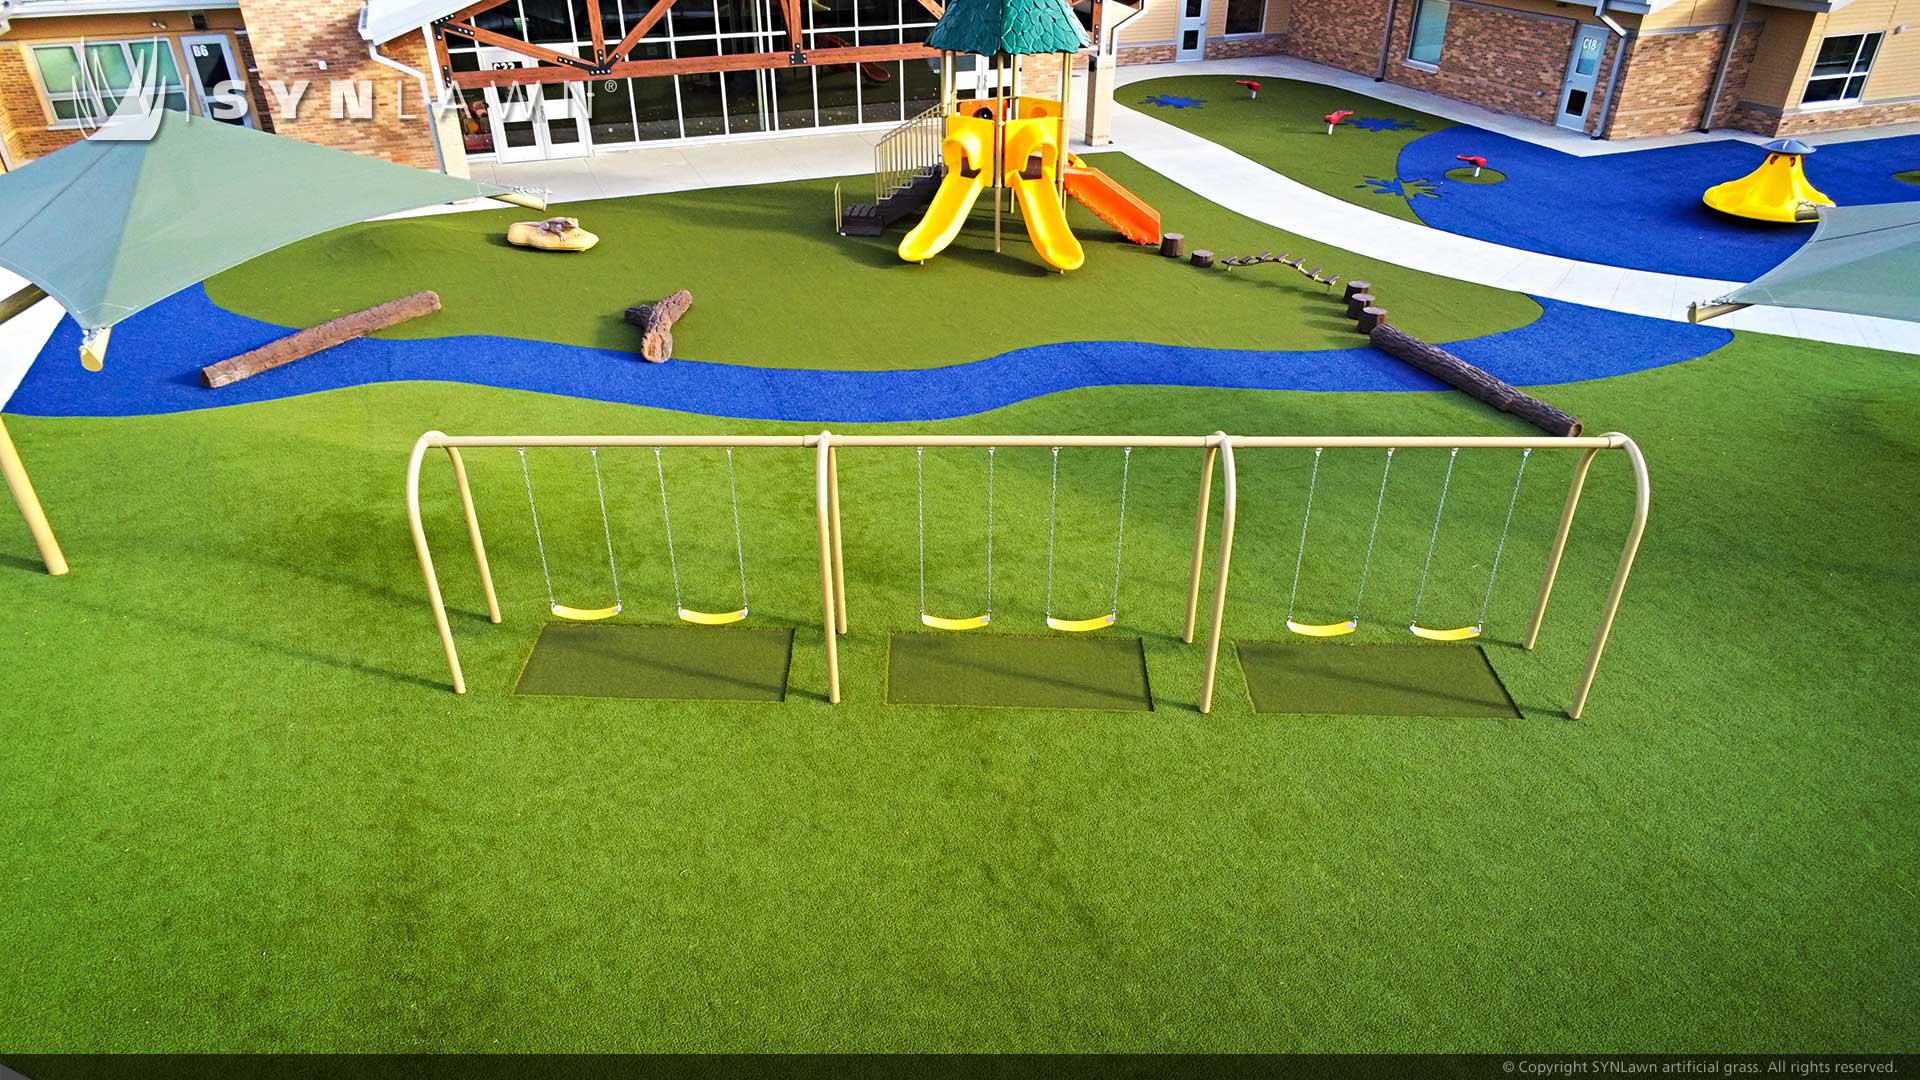 image of SYNLawn artificial playground grass at Liggett Trails Early Education Center in Kansas City